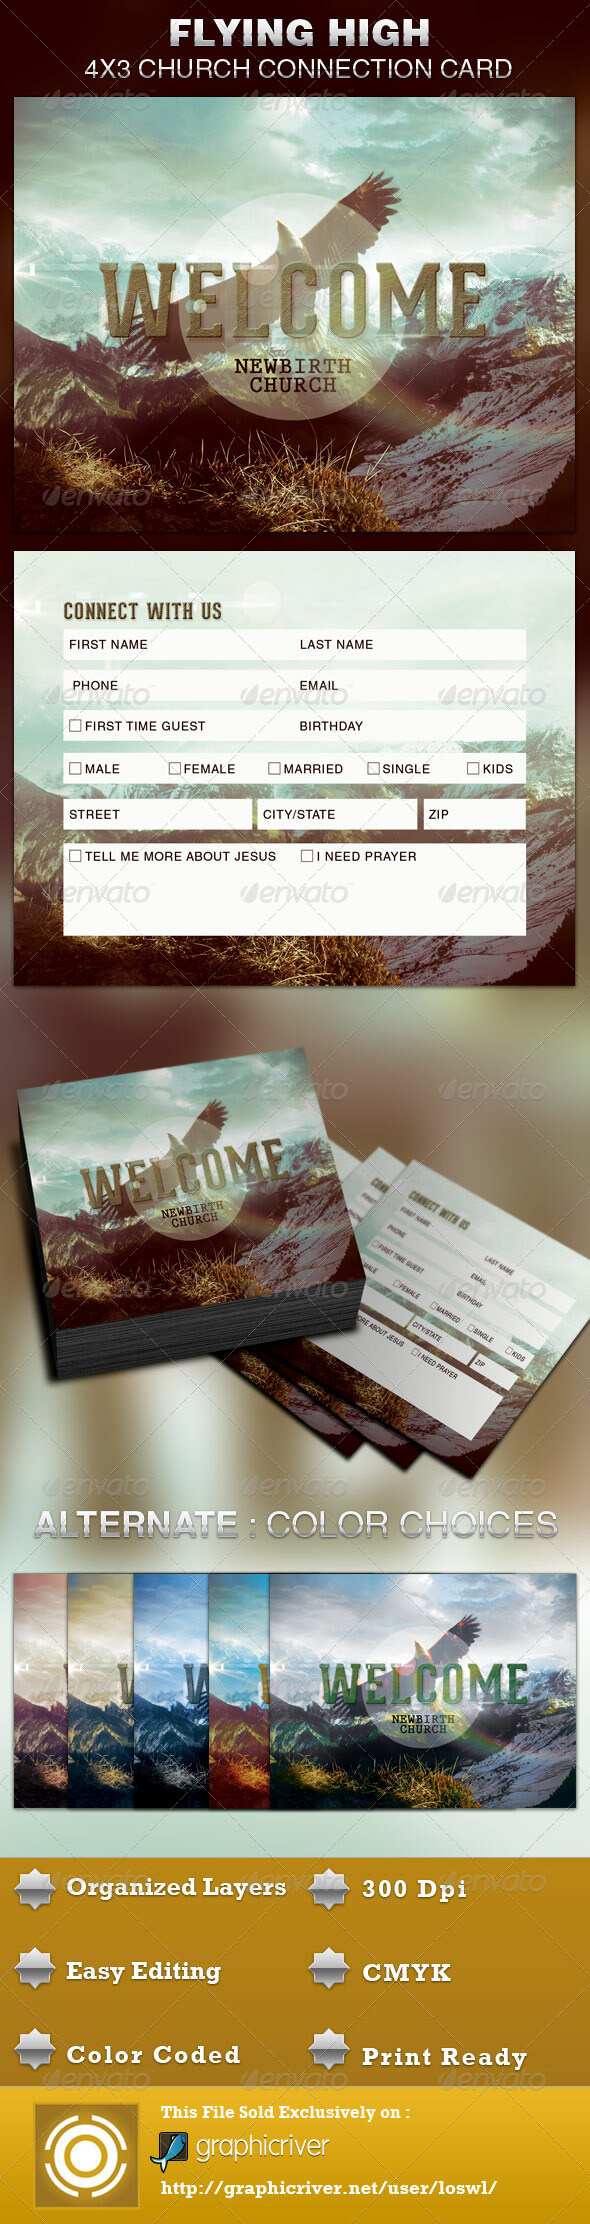 Summit Card Designs & Invite Templates From Graphicriver Intended For Decision Card Template